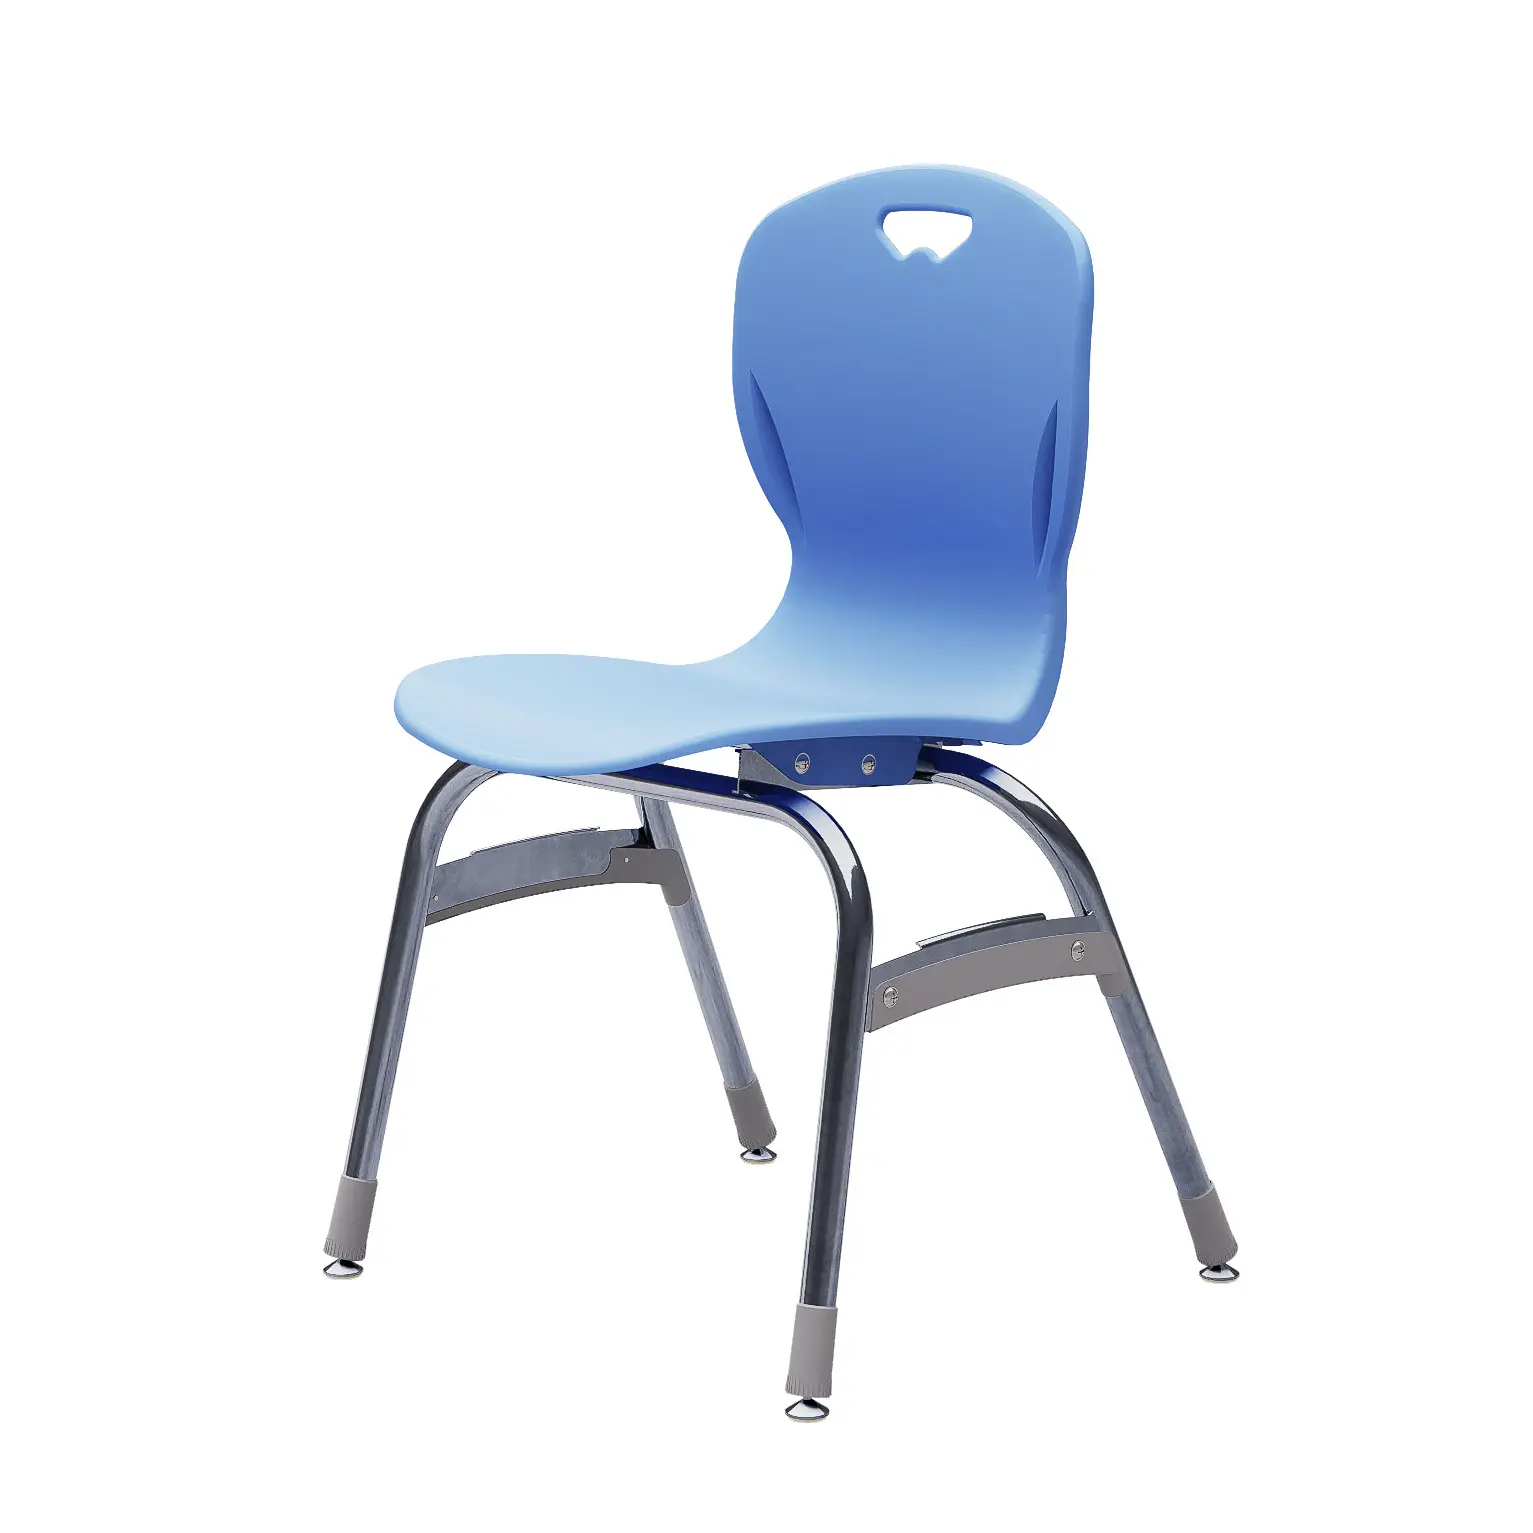 New Modern American Style School Chair Furniture Classroom Plastic Stackable Chairs For Student